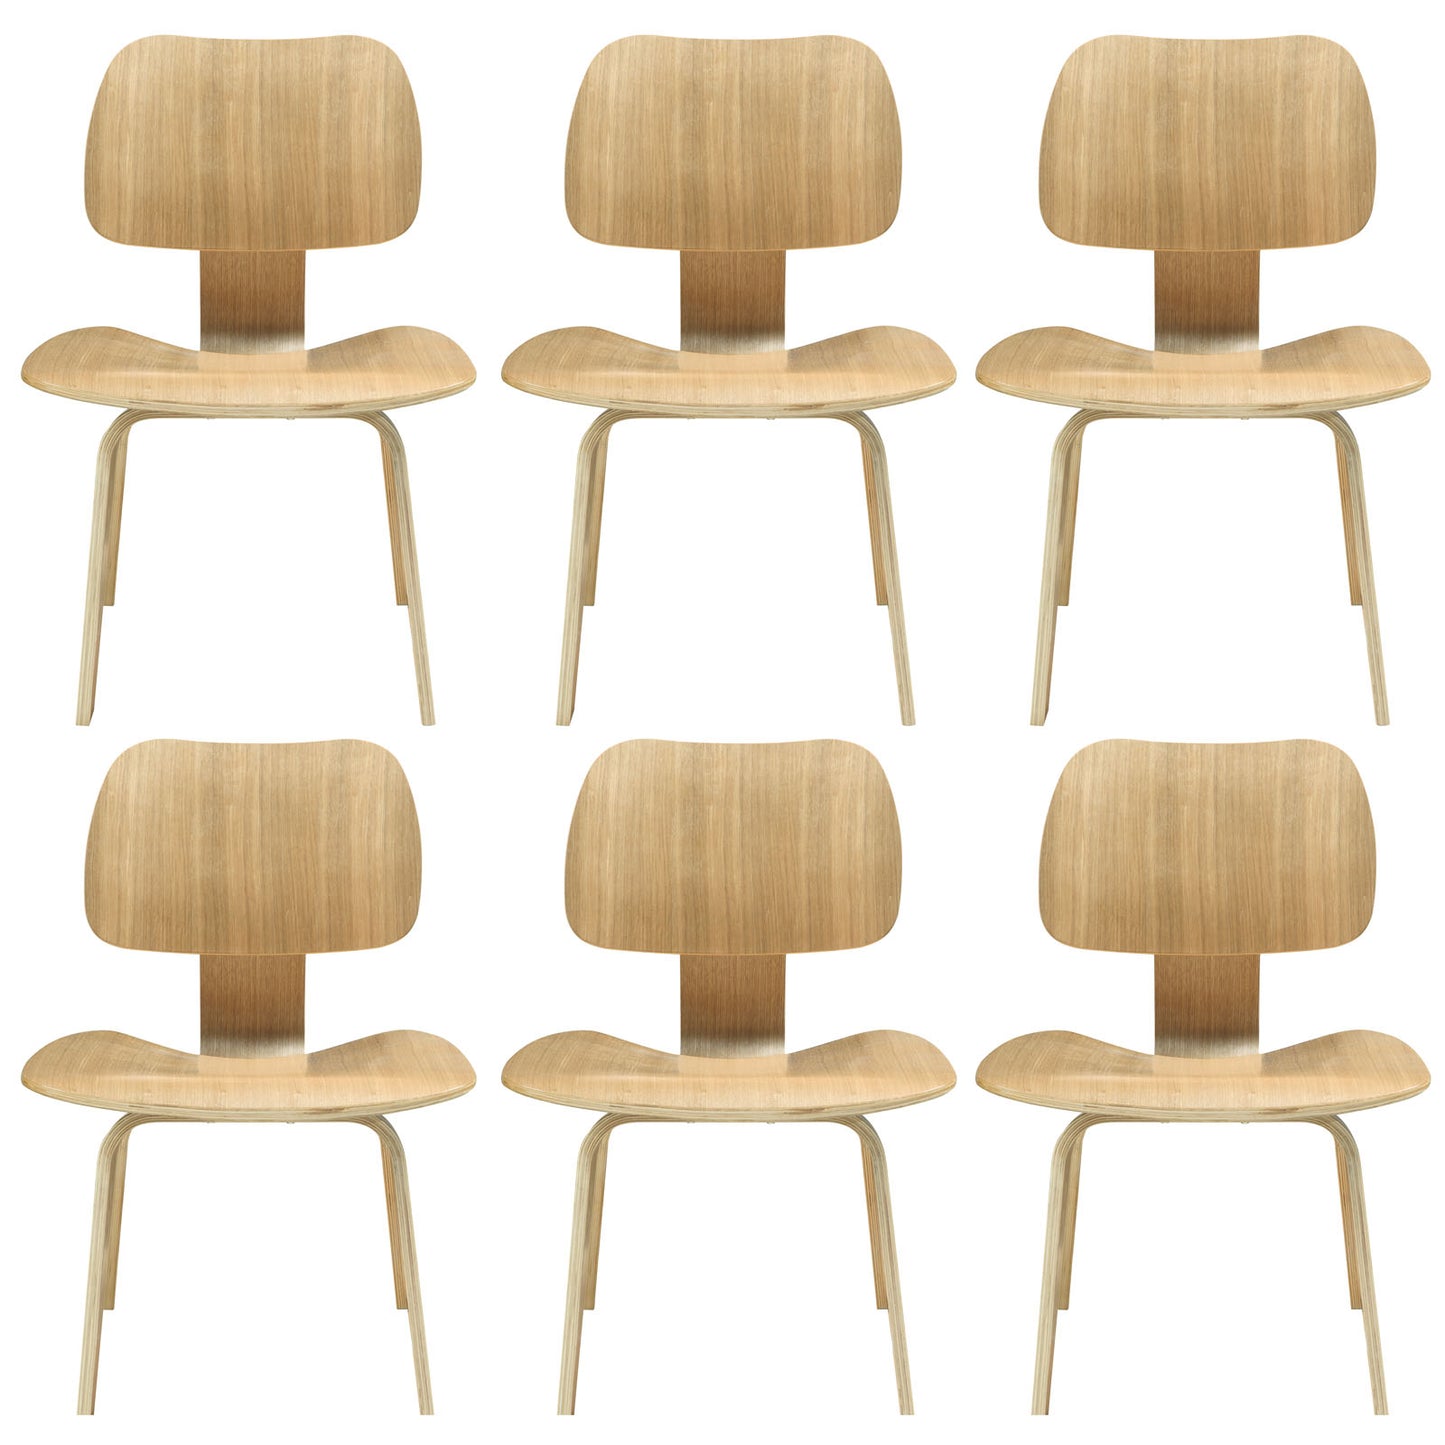 Fathom Dining Chairs Set of 6 Natural EEI-910-NAT